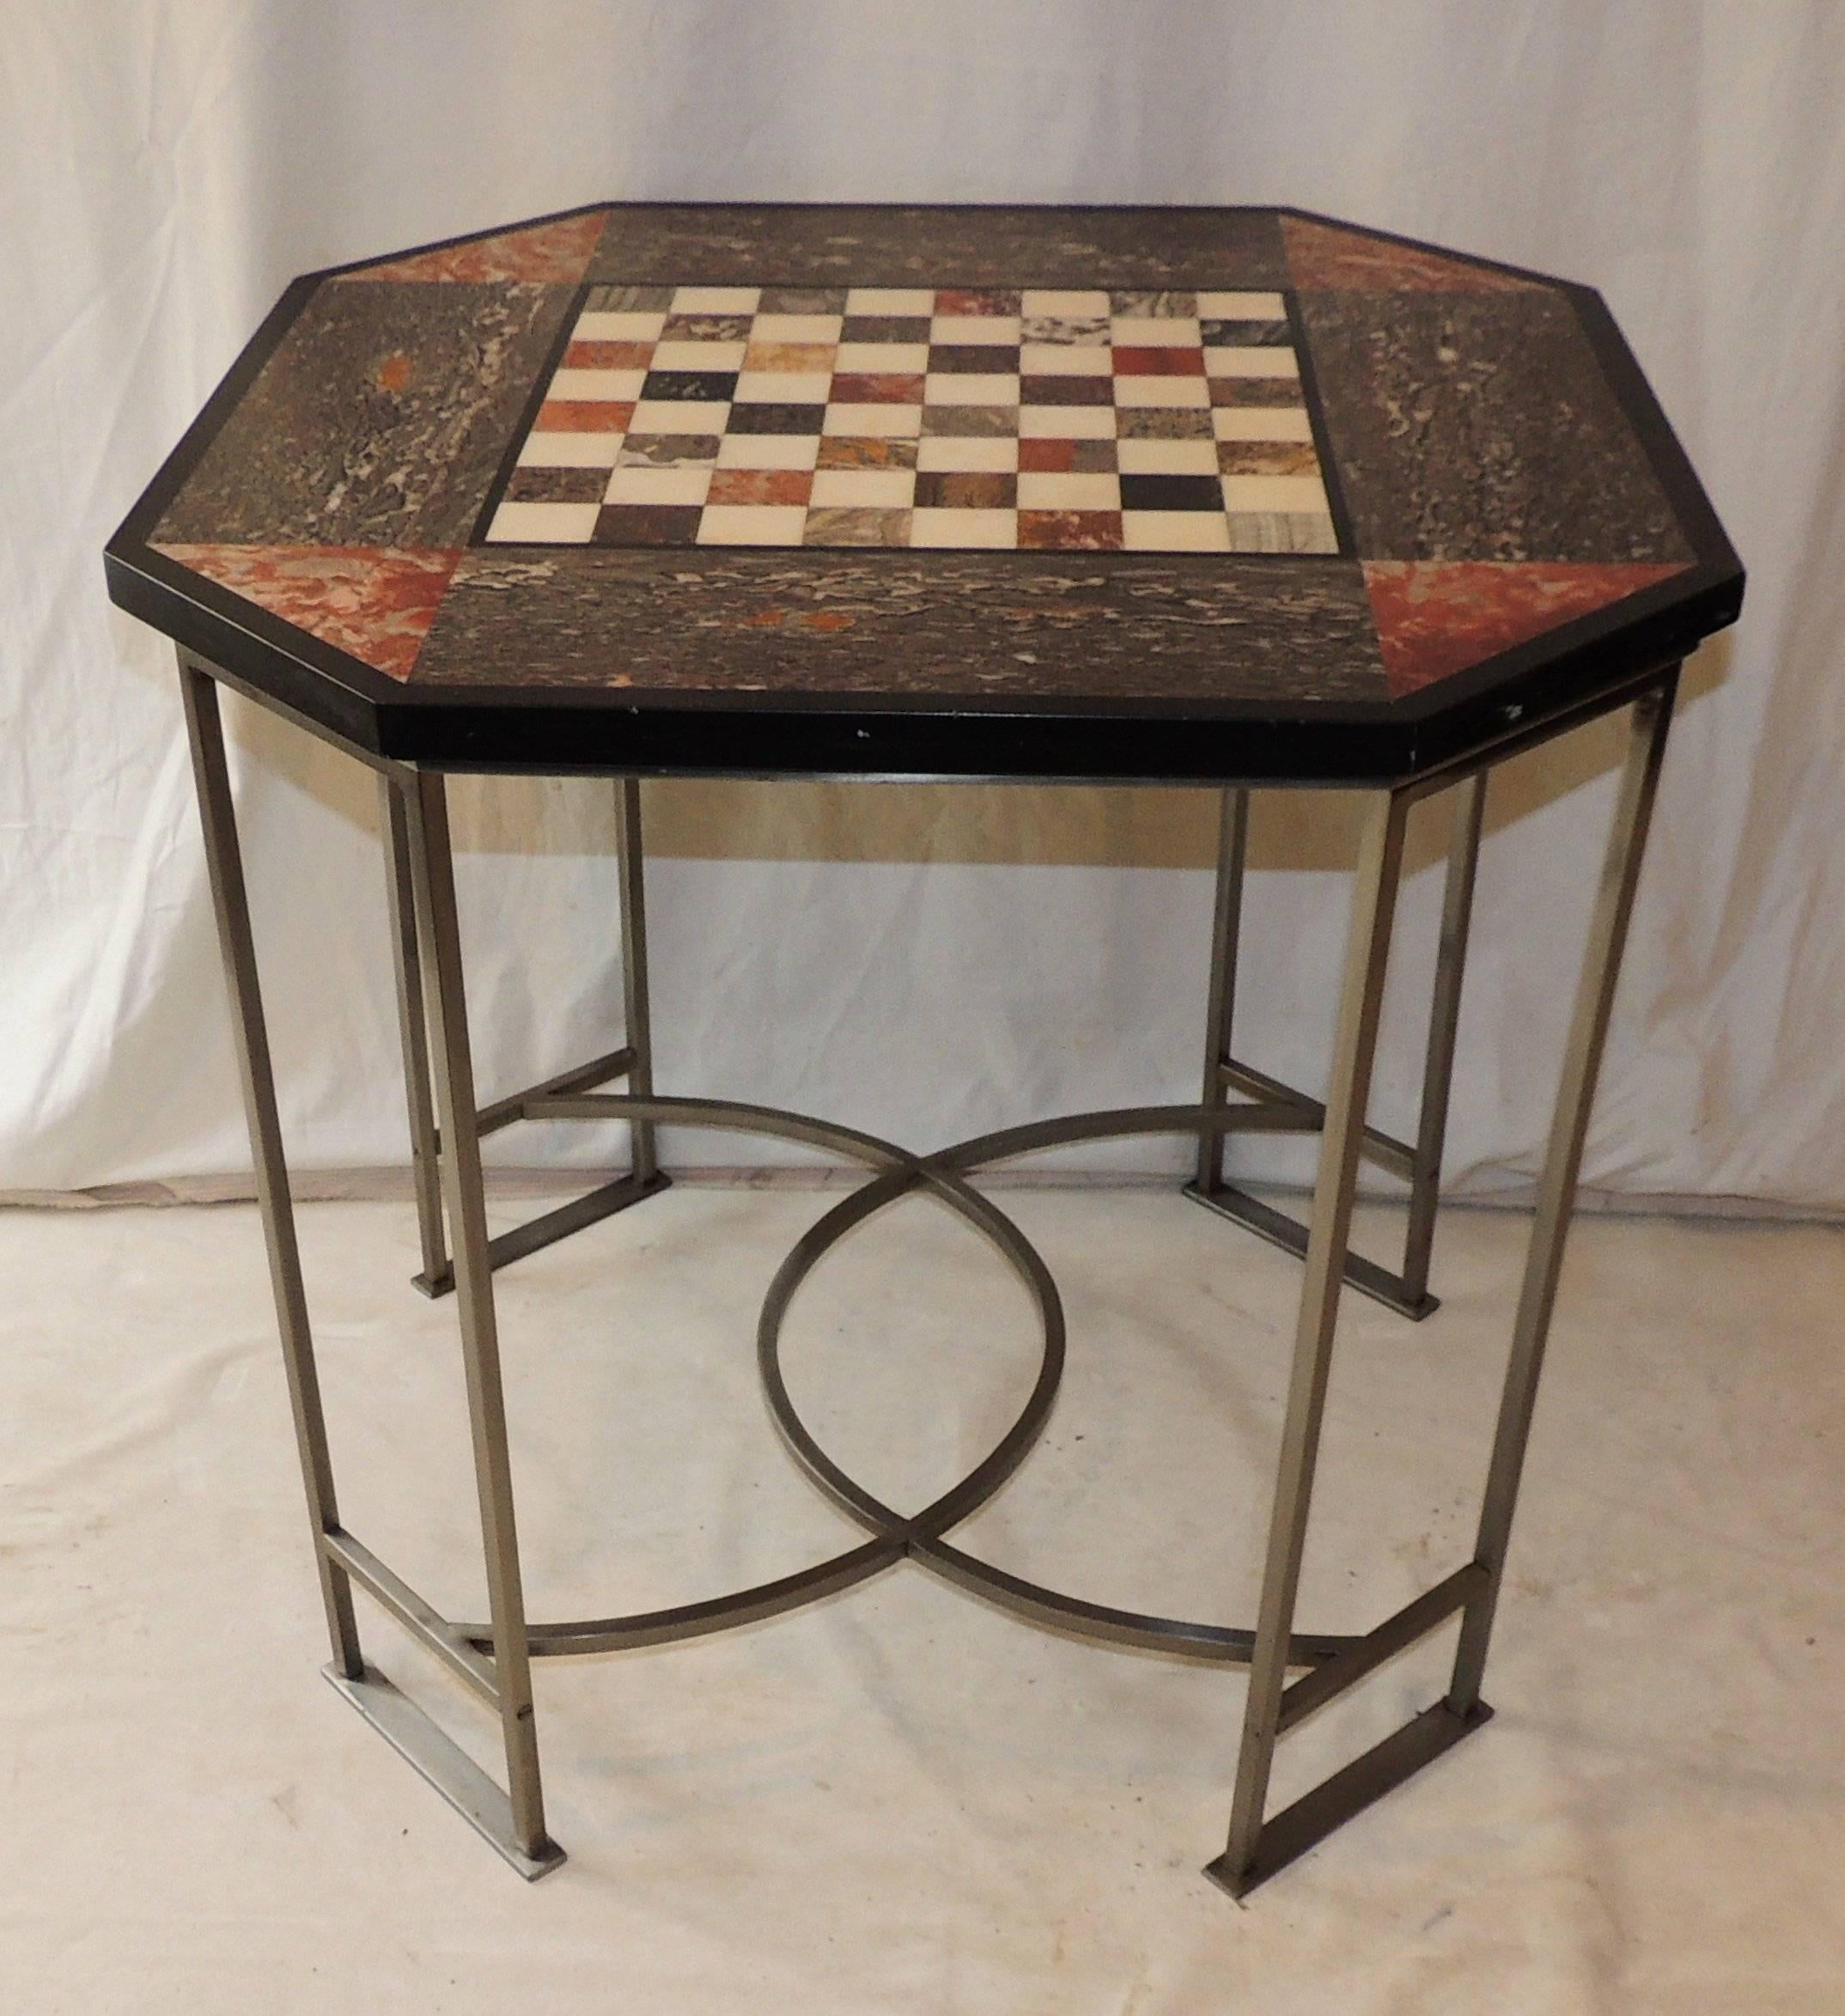 Beautiful multiple types of marble inlays decorate the top of this unusual game table with circular decorative legs.

Measures: 27.5" L x 27.5" W x 26.5" H.